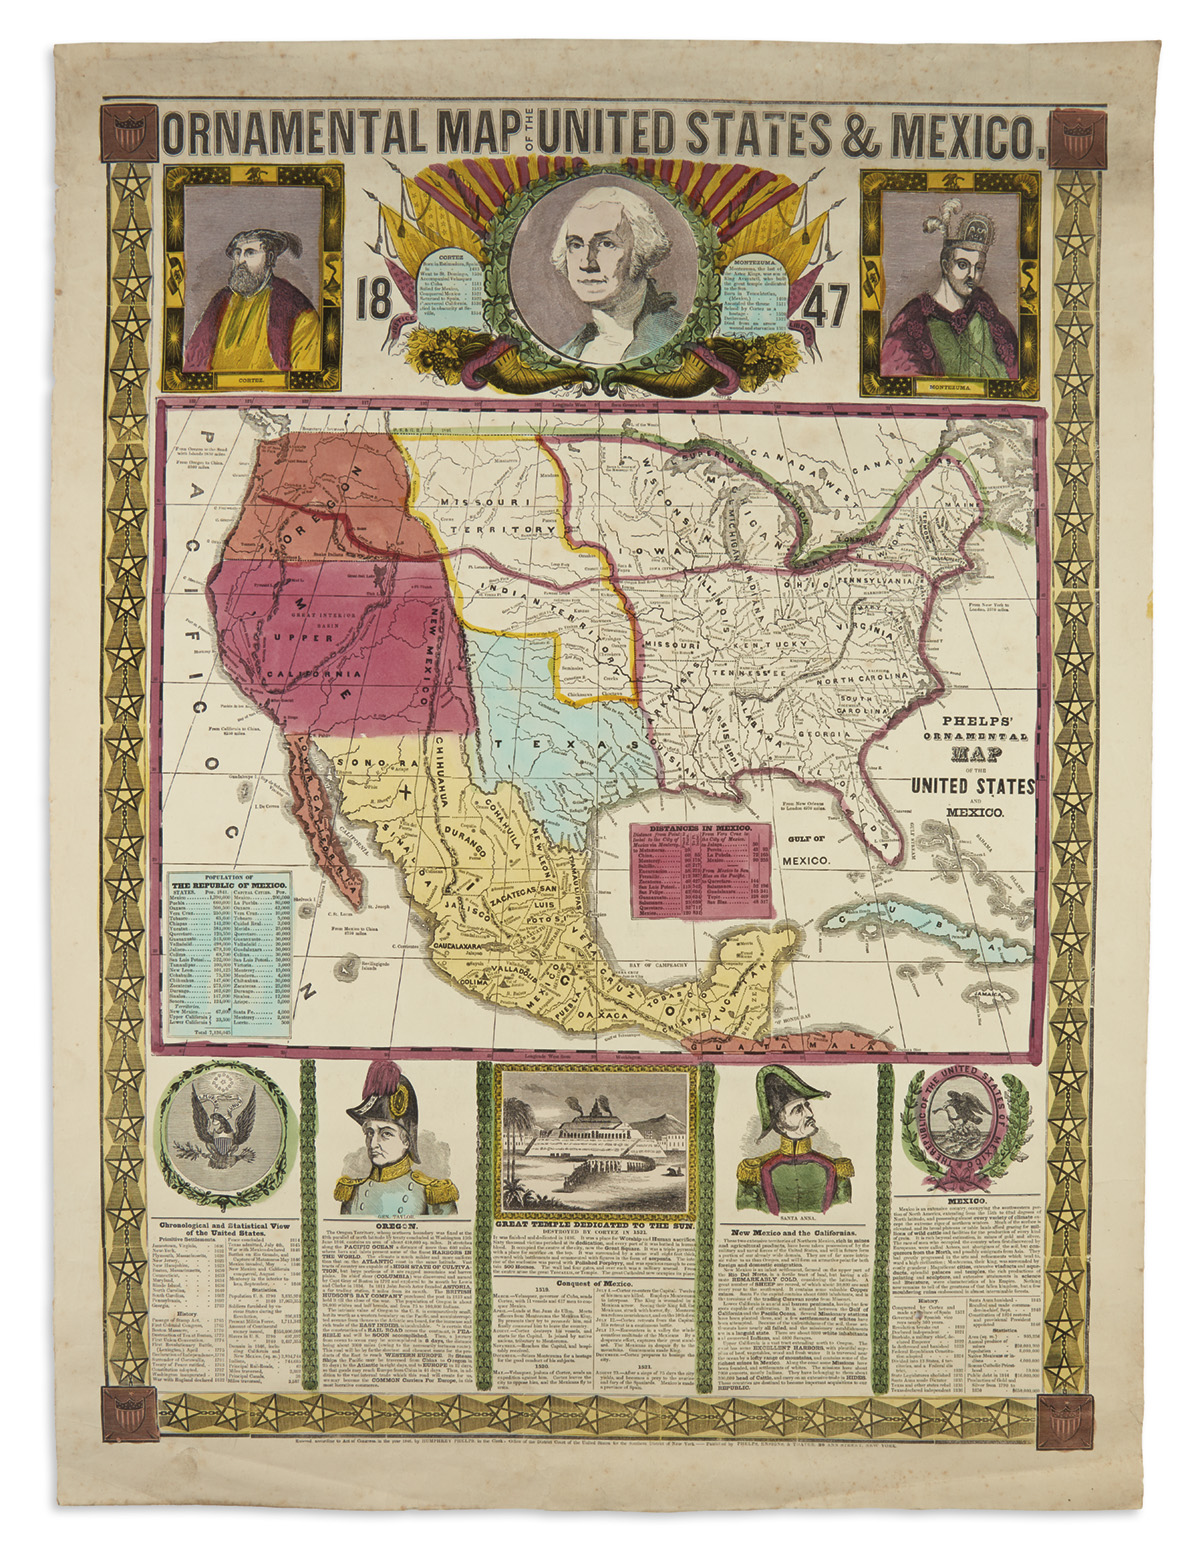 PHELPS, HUMPHREY. Ornamental Map of the United States & Mexico.